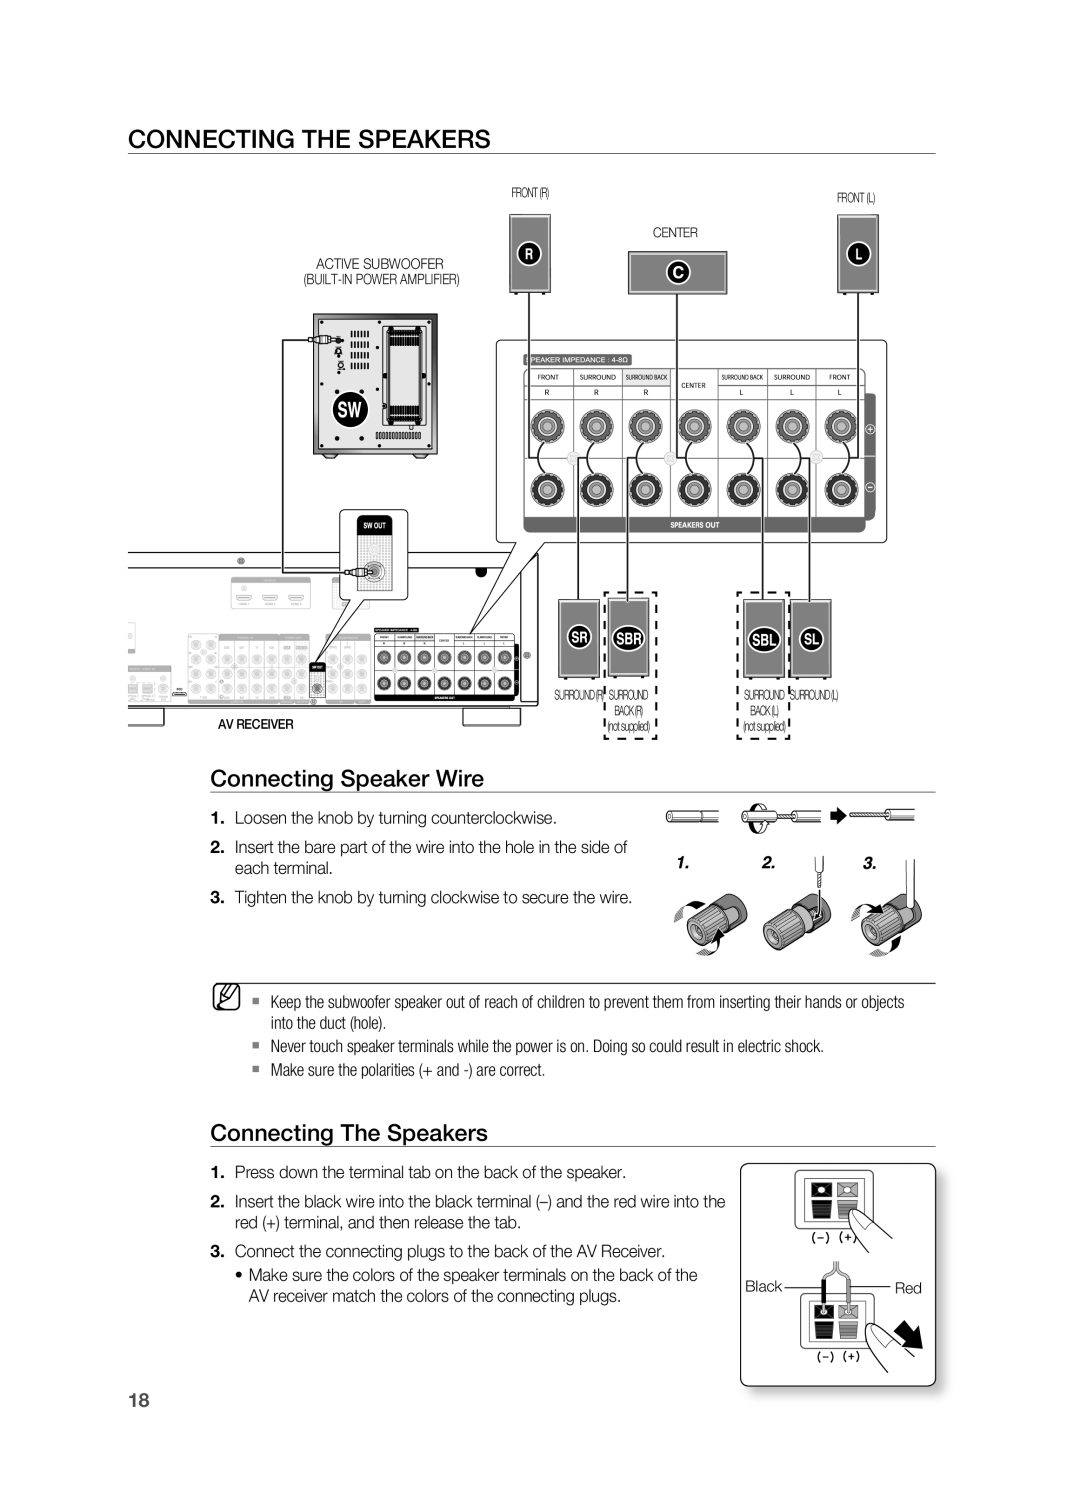 Samsung HT-AS730S user manual COnneCting tHe SpeakerS, Connecting Speaker Wire, Connecting the Speakers 